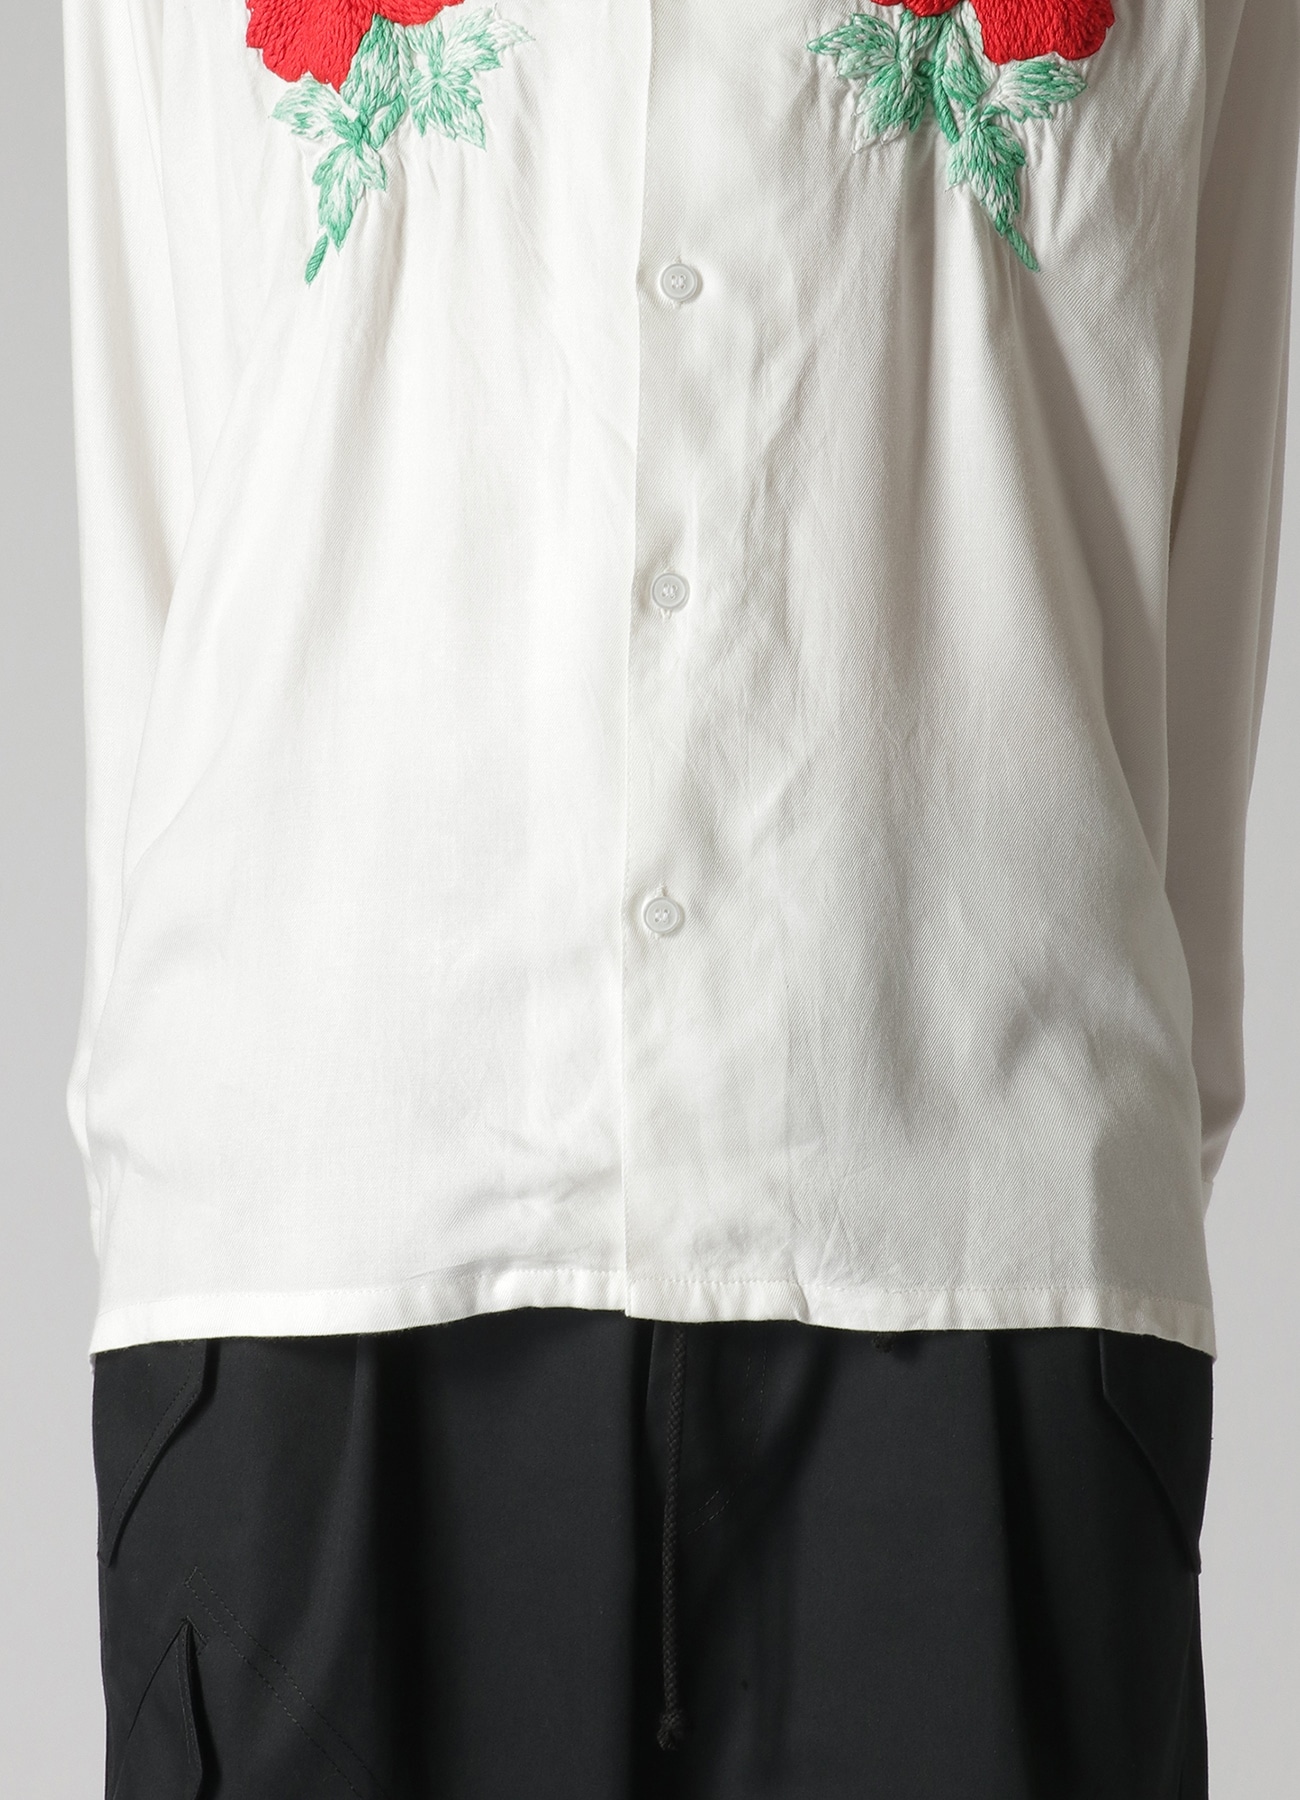 WILDSIDE × NOMA t.d. HAND EMBROIDERY Shirt(M WHITE): NOMAbloc 